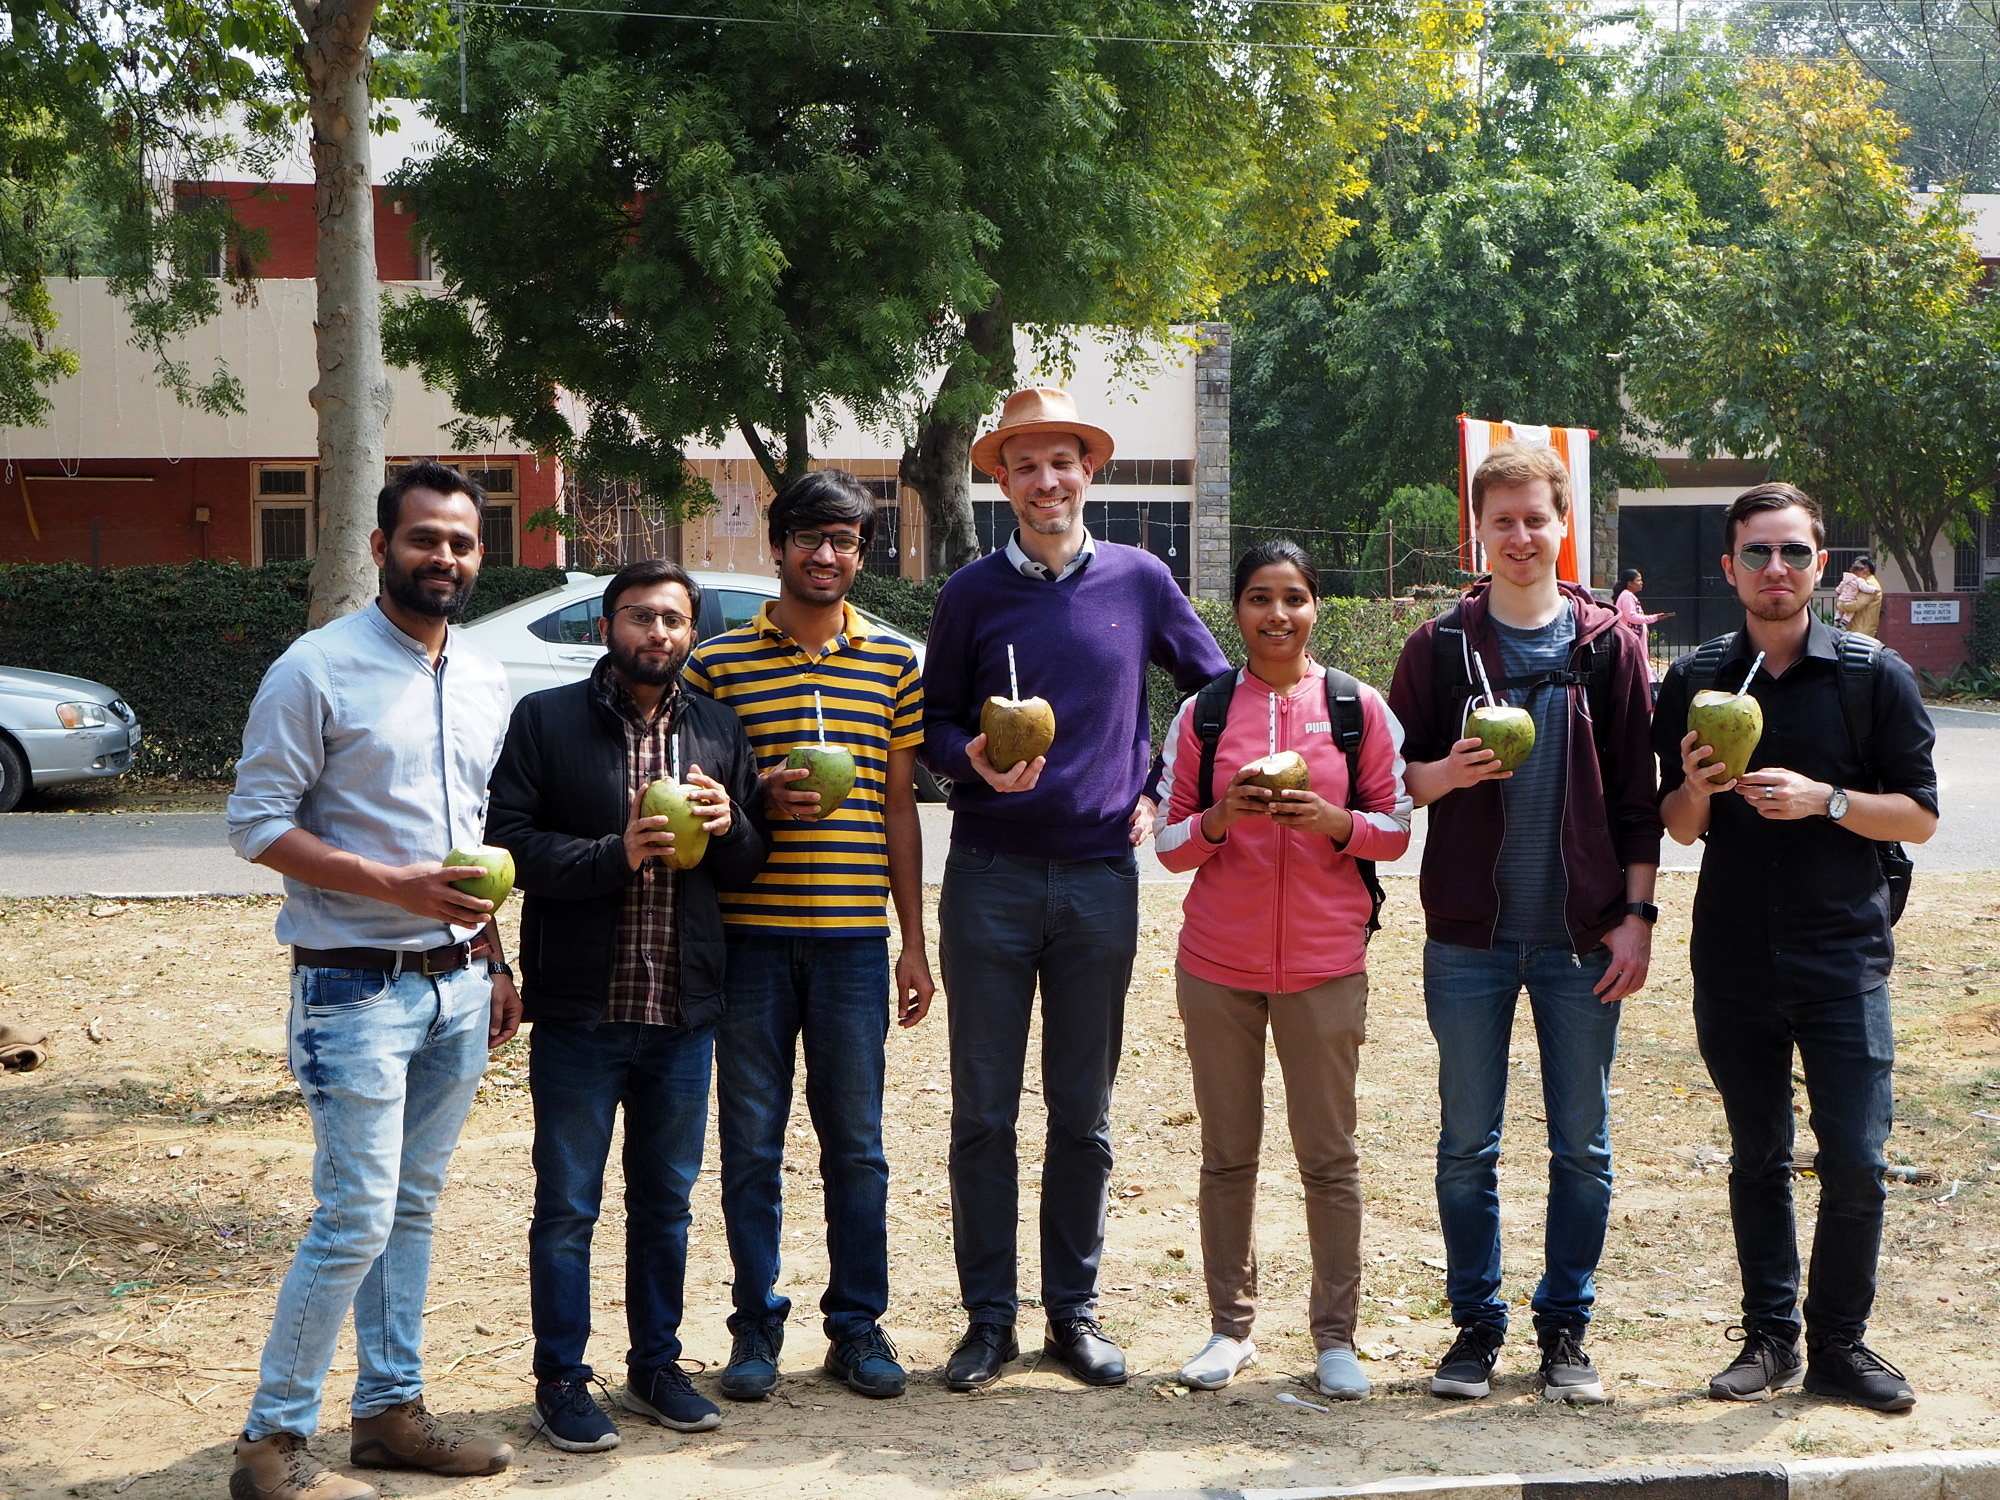 Group photo of seven researchers from the technical faculties at Friedrich-Alexander-Universität Erlangen-Nürnberg and the Indian Institute of Technology Delhi drinking coconut milk in Delhi.